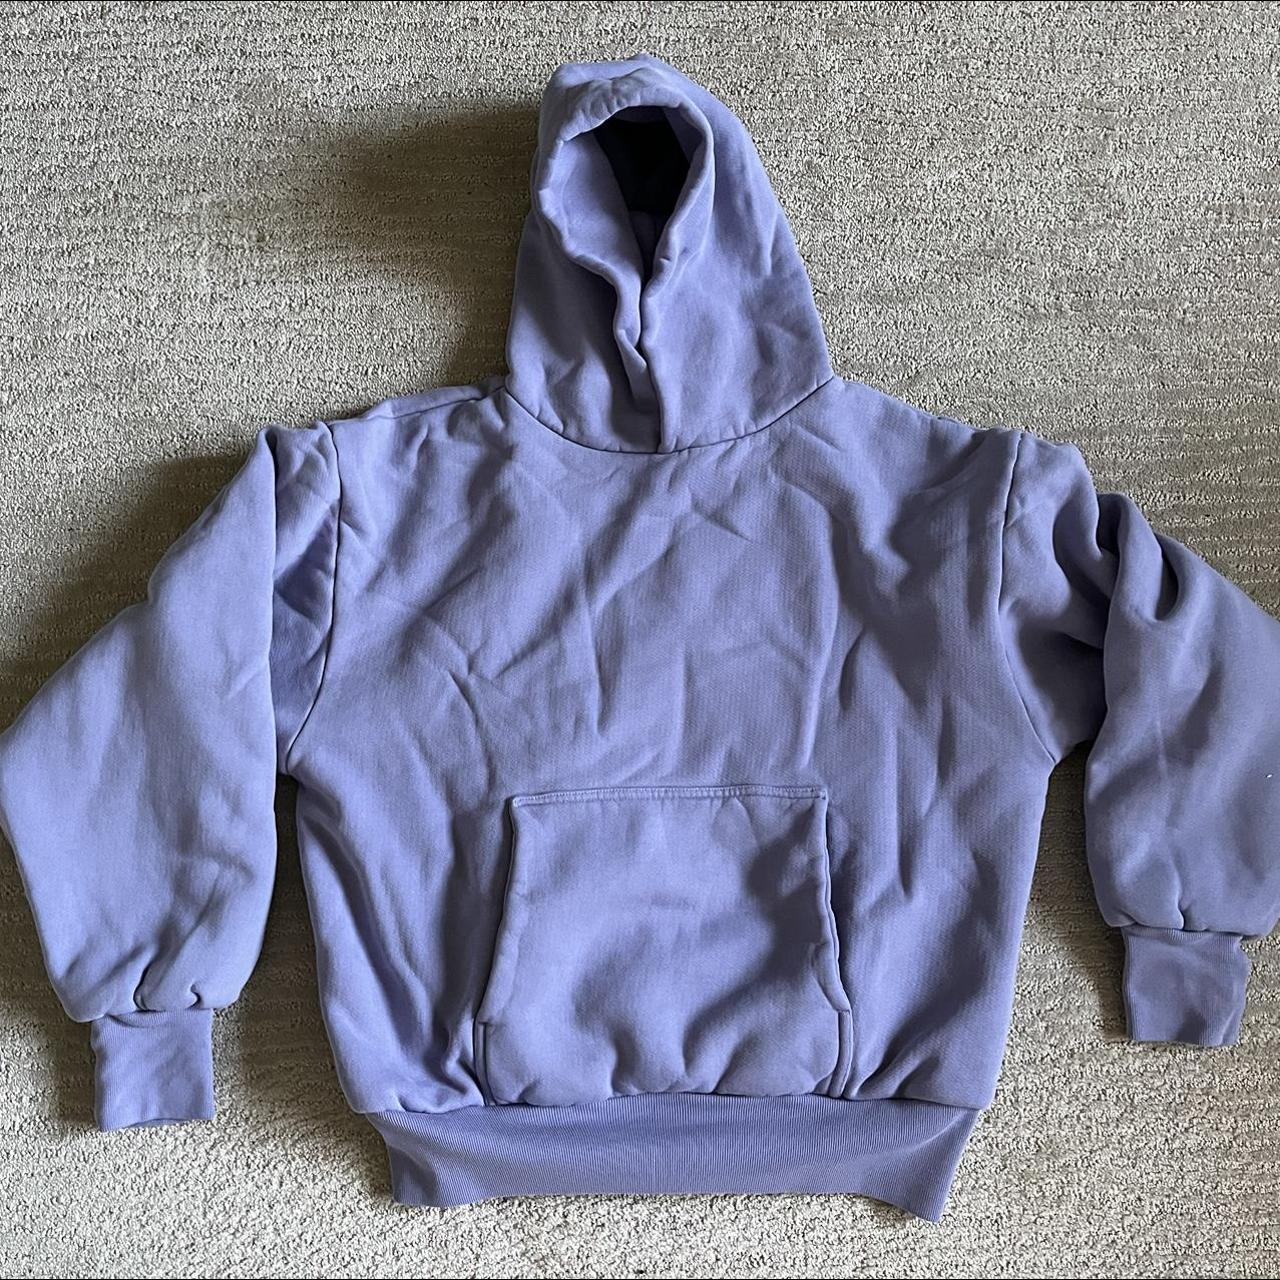 Kanye west 2020 vision double layered hoodie. Brand...